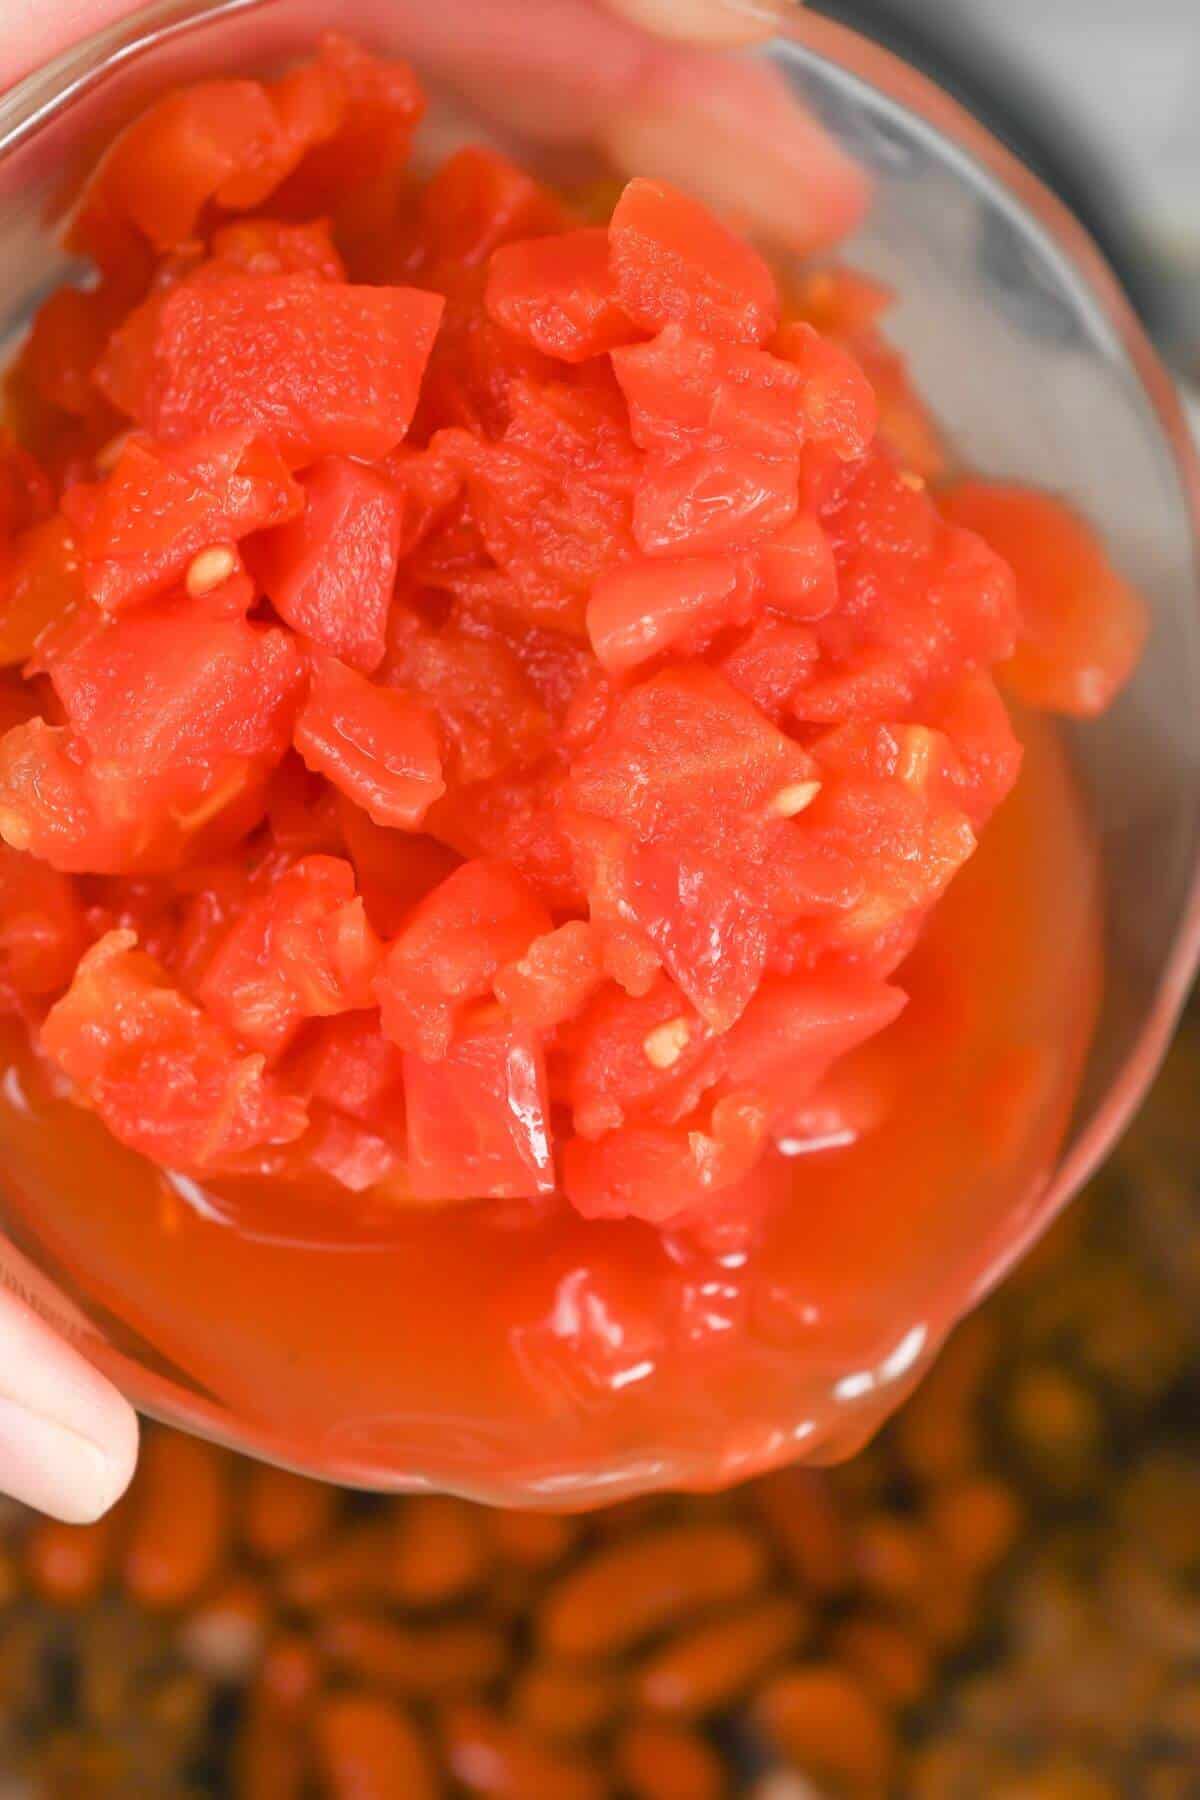 A hand holding a bowl of diced tomatoes over skillet of chili mix.